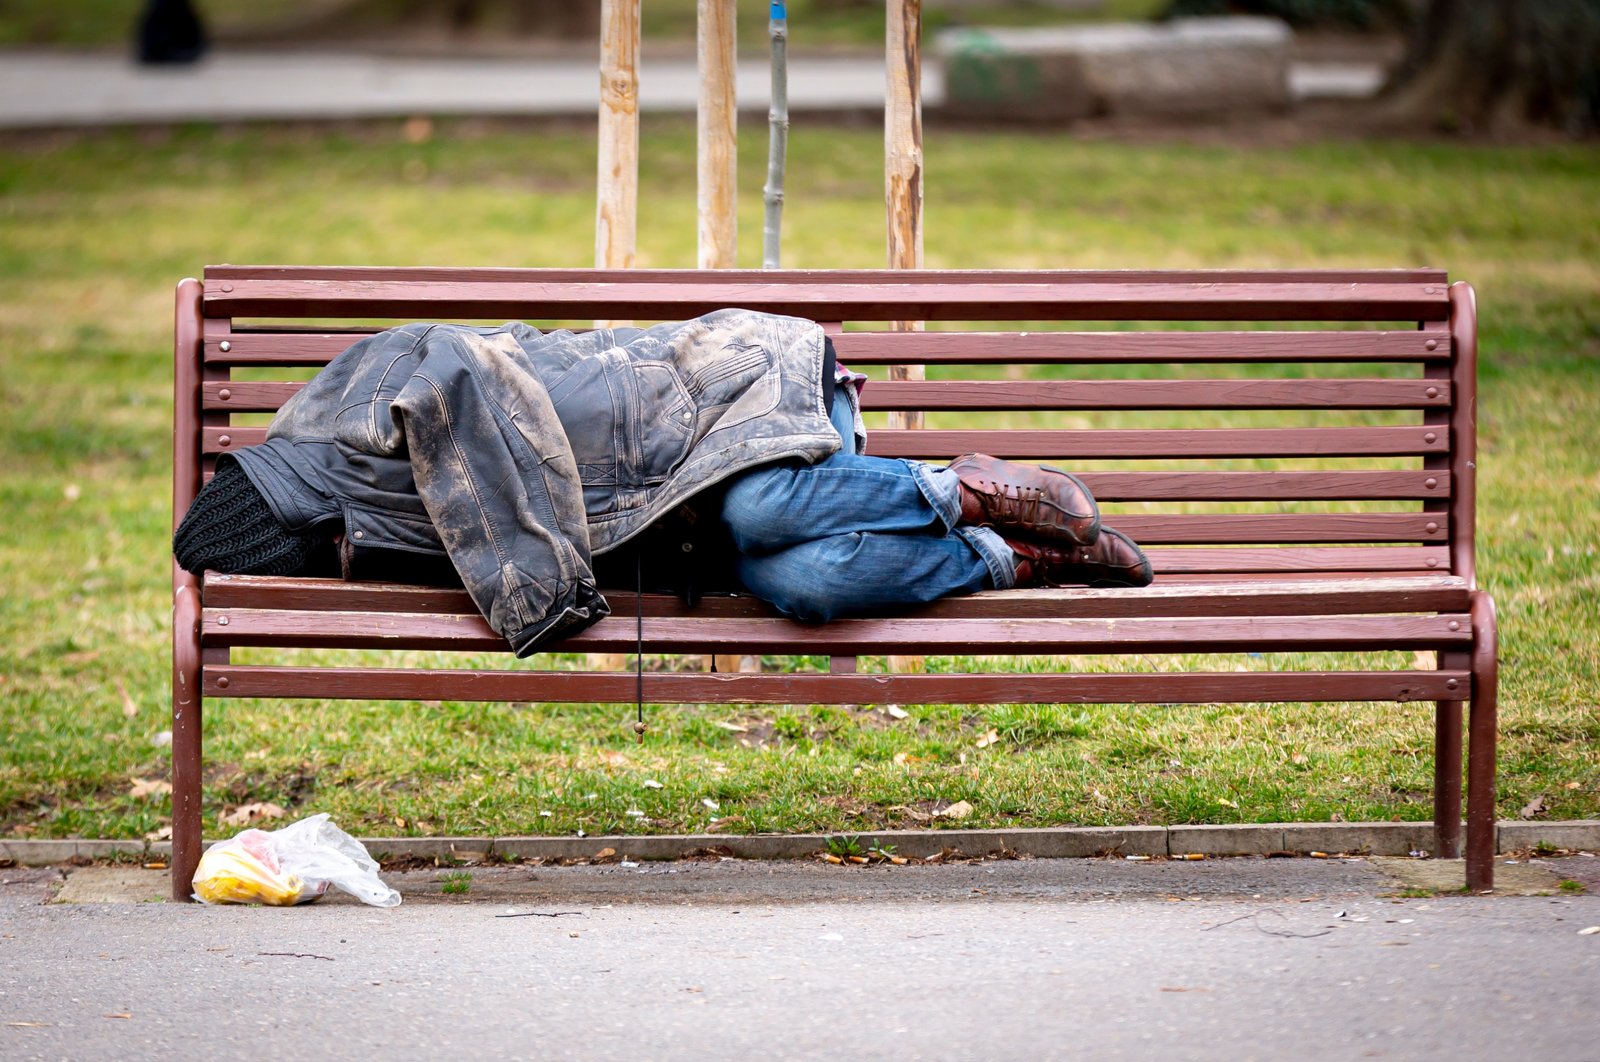 A homeless man sleeps on a bench covered with his jacket in a public park during the day, 2020. (Shutterstcok Photo)